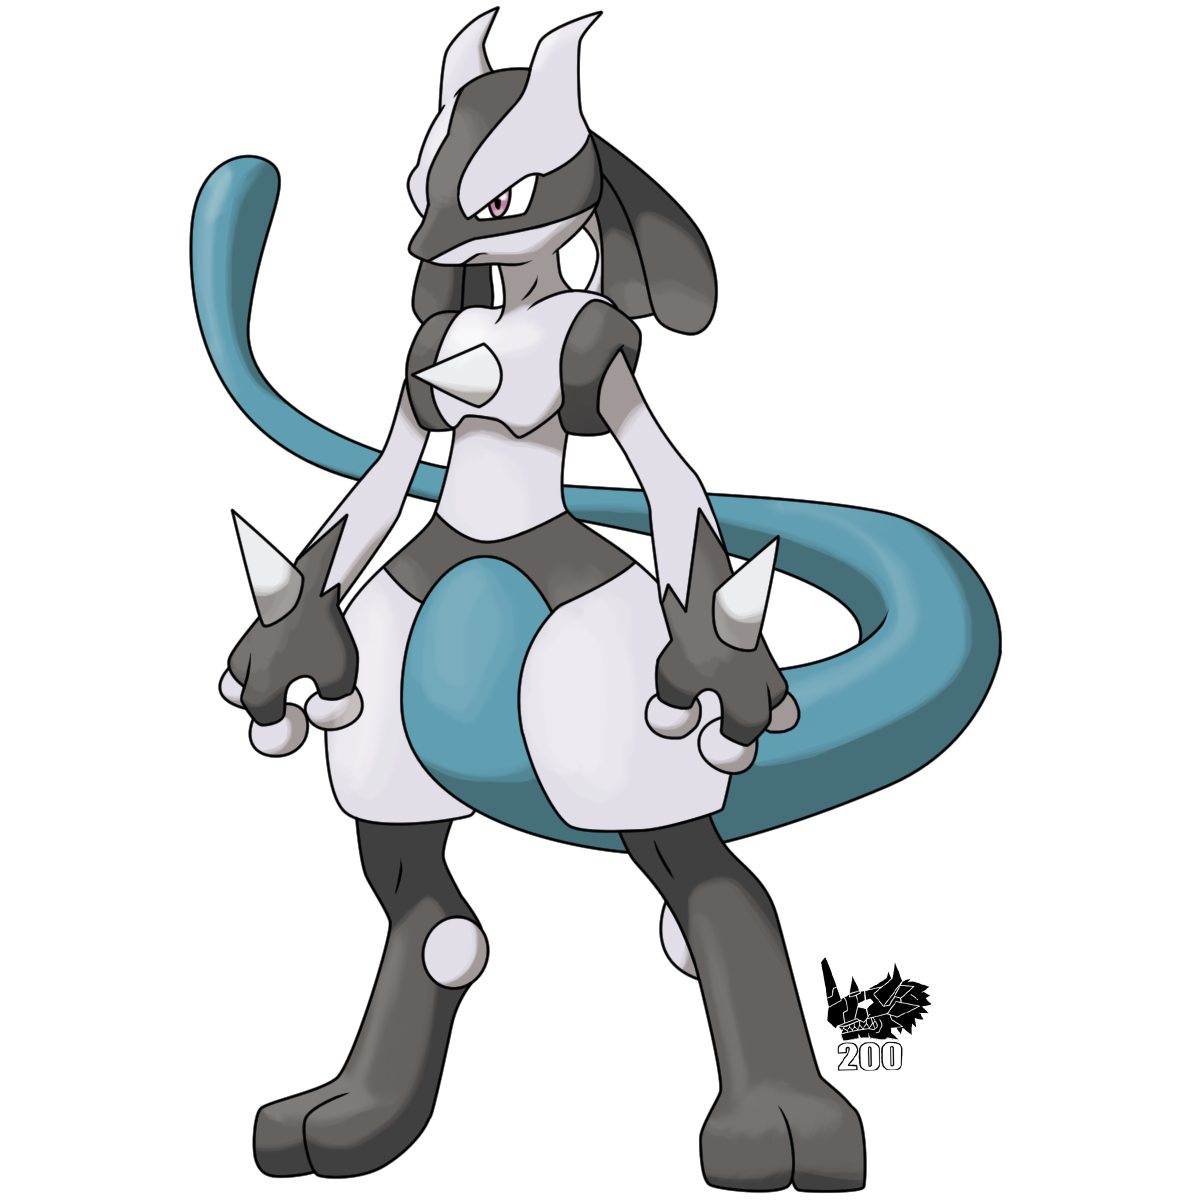 Shiny Lucario Global Link Art by TrainerParshen on DeviantArt